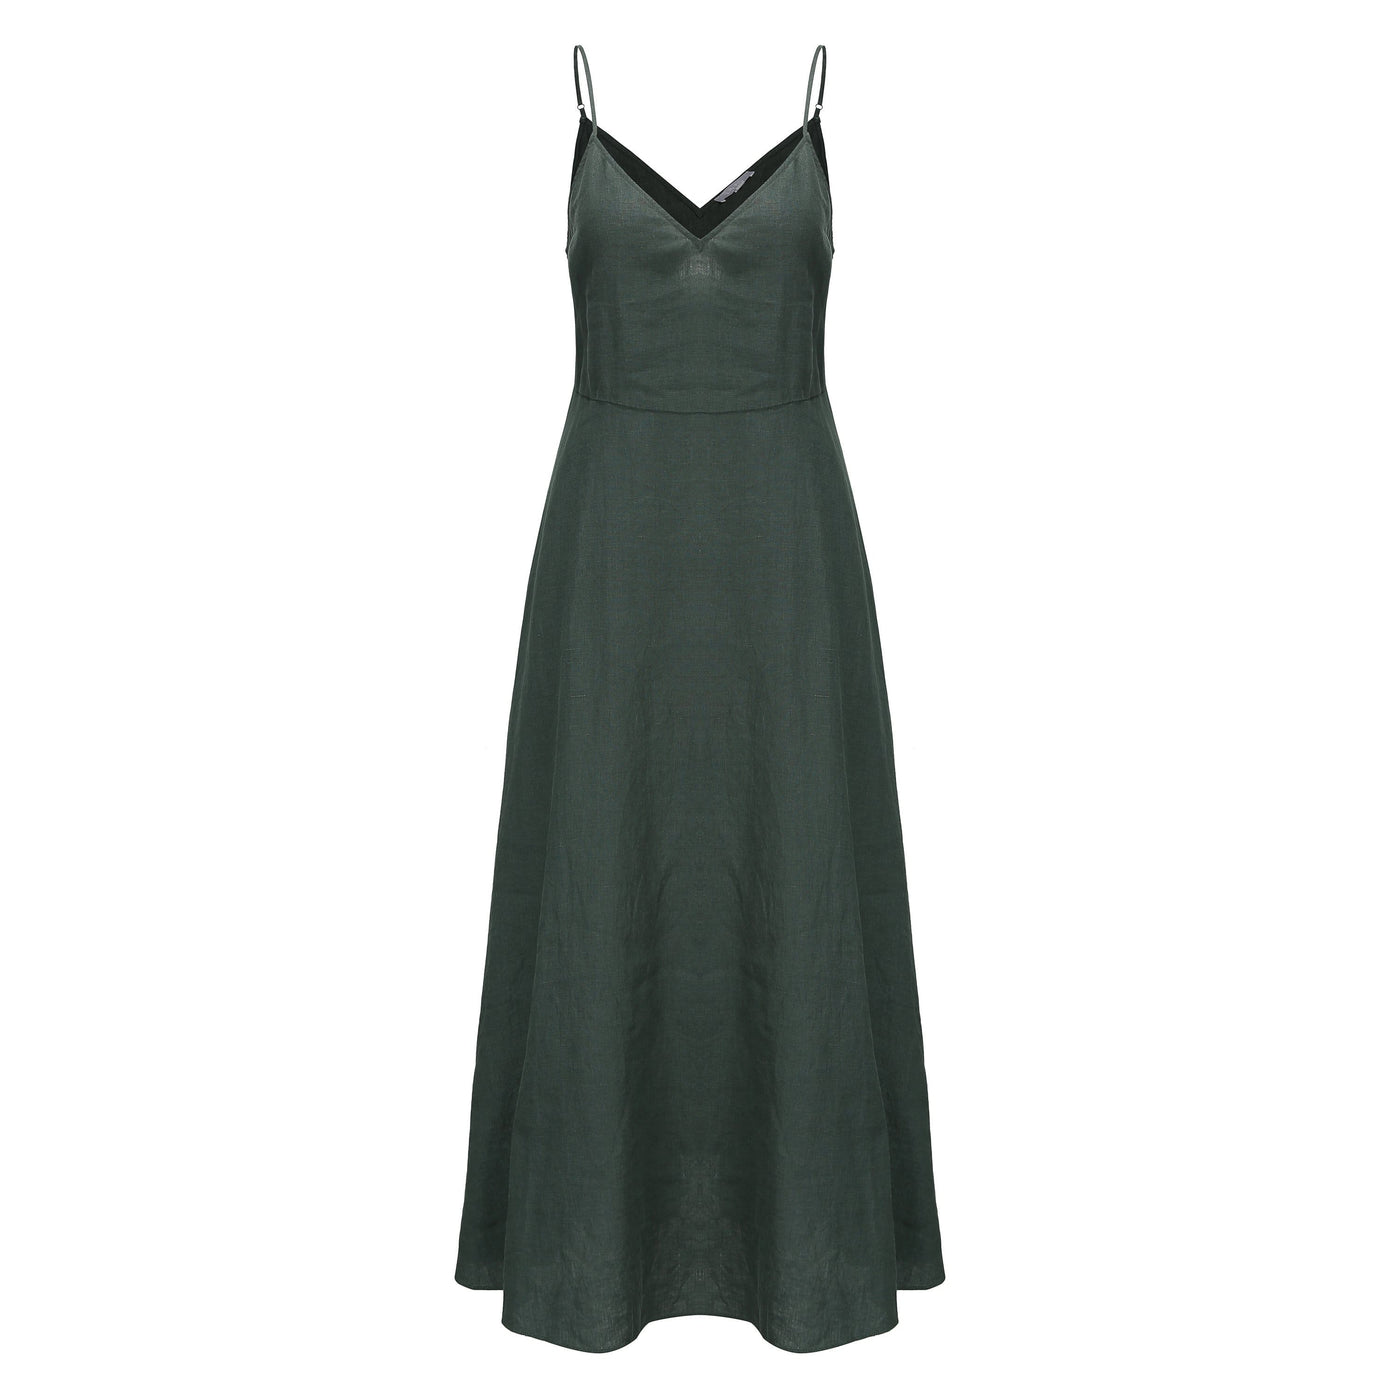 Lilly Pilly Collection 100% organic linen Zoe Dress in Bottle Green as 3D image showing front view